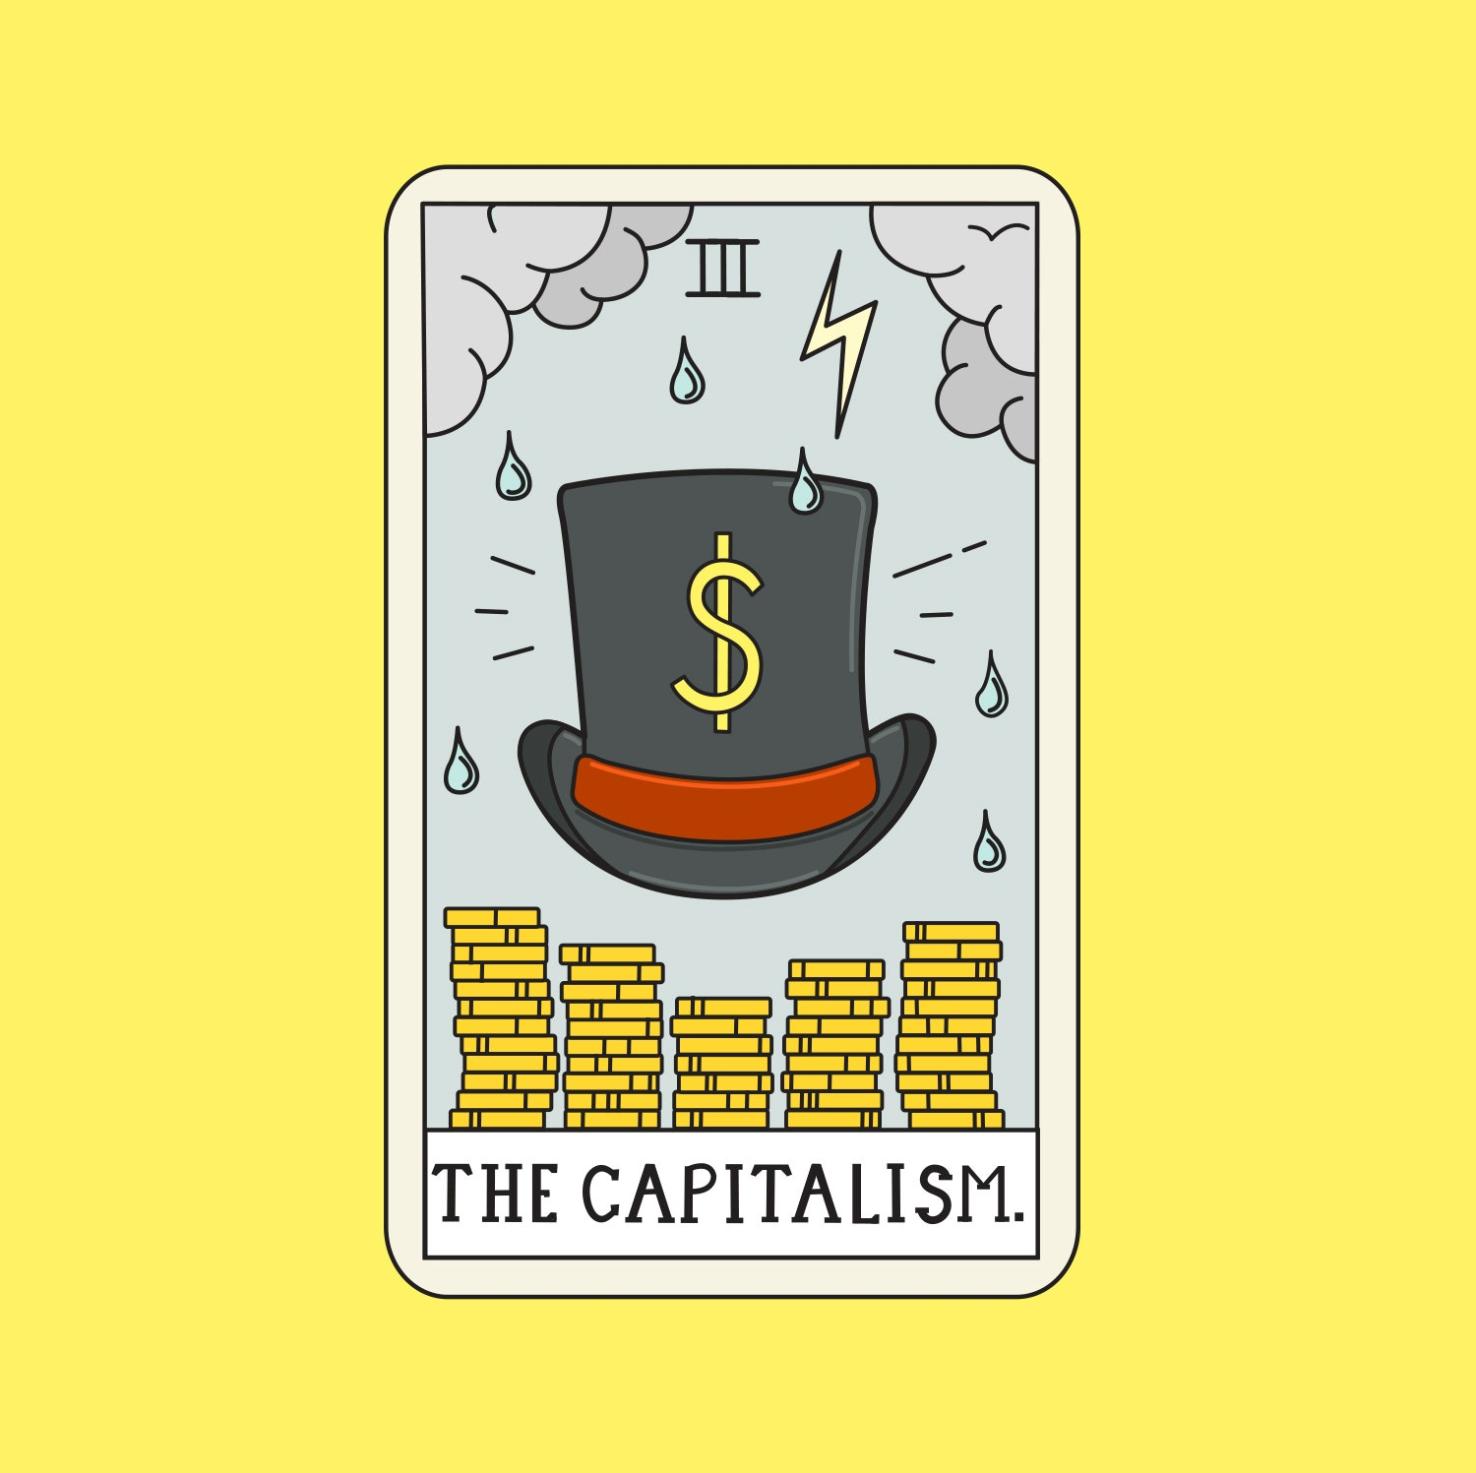 What Are the Historical Roots of Big Government Capitalism?